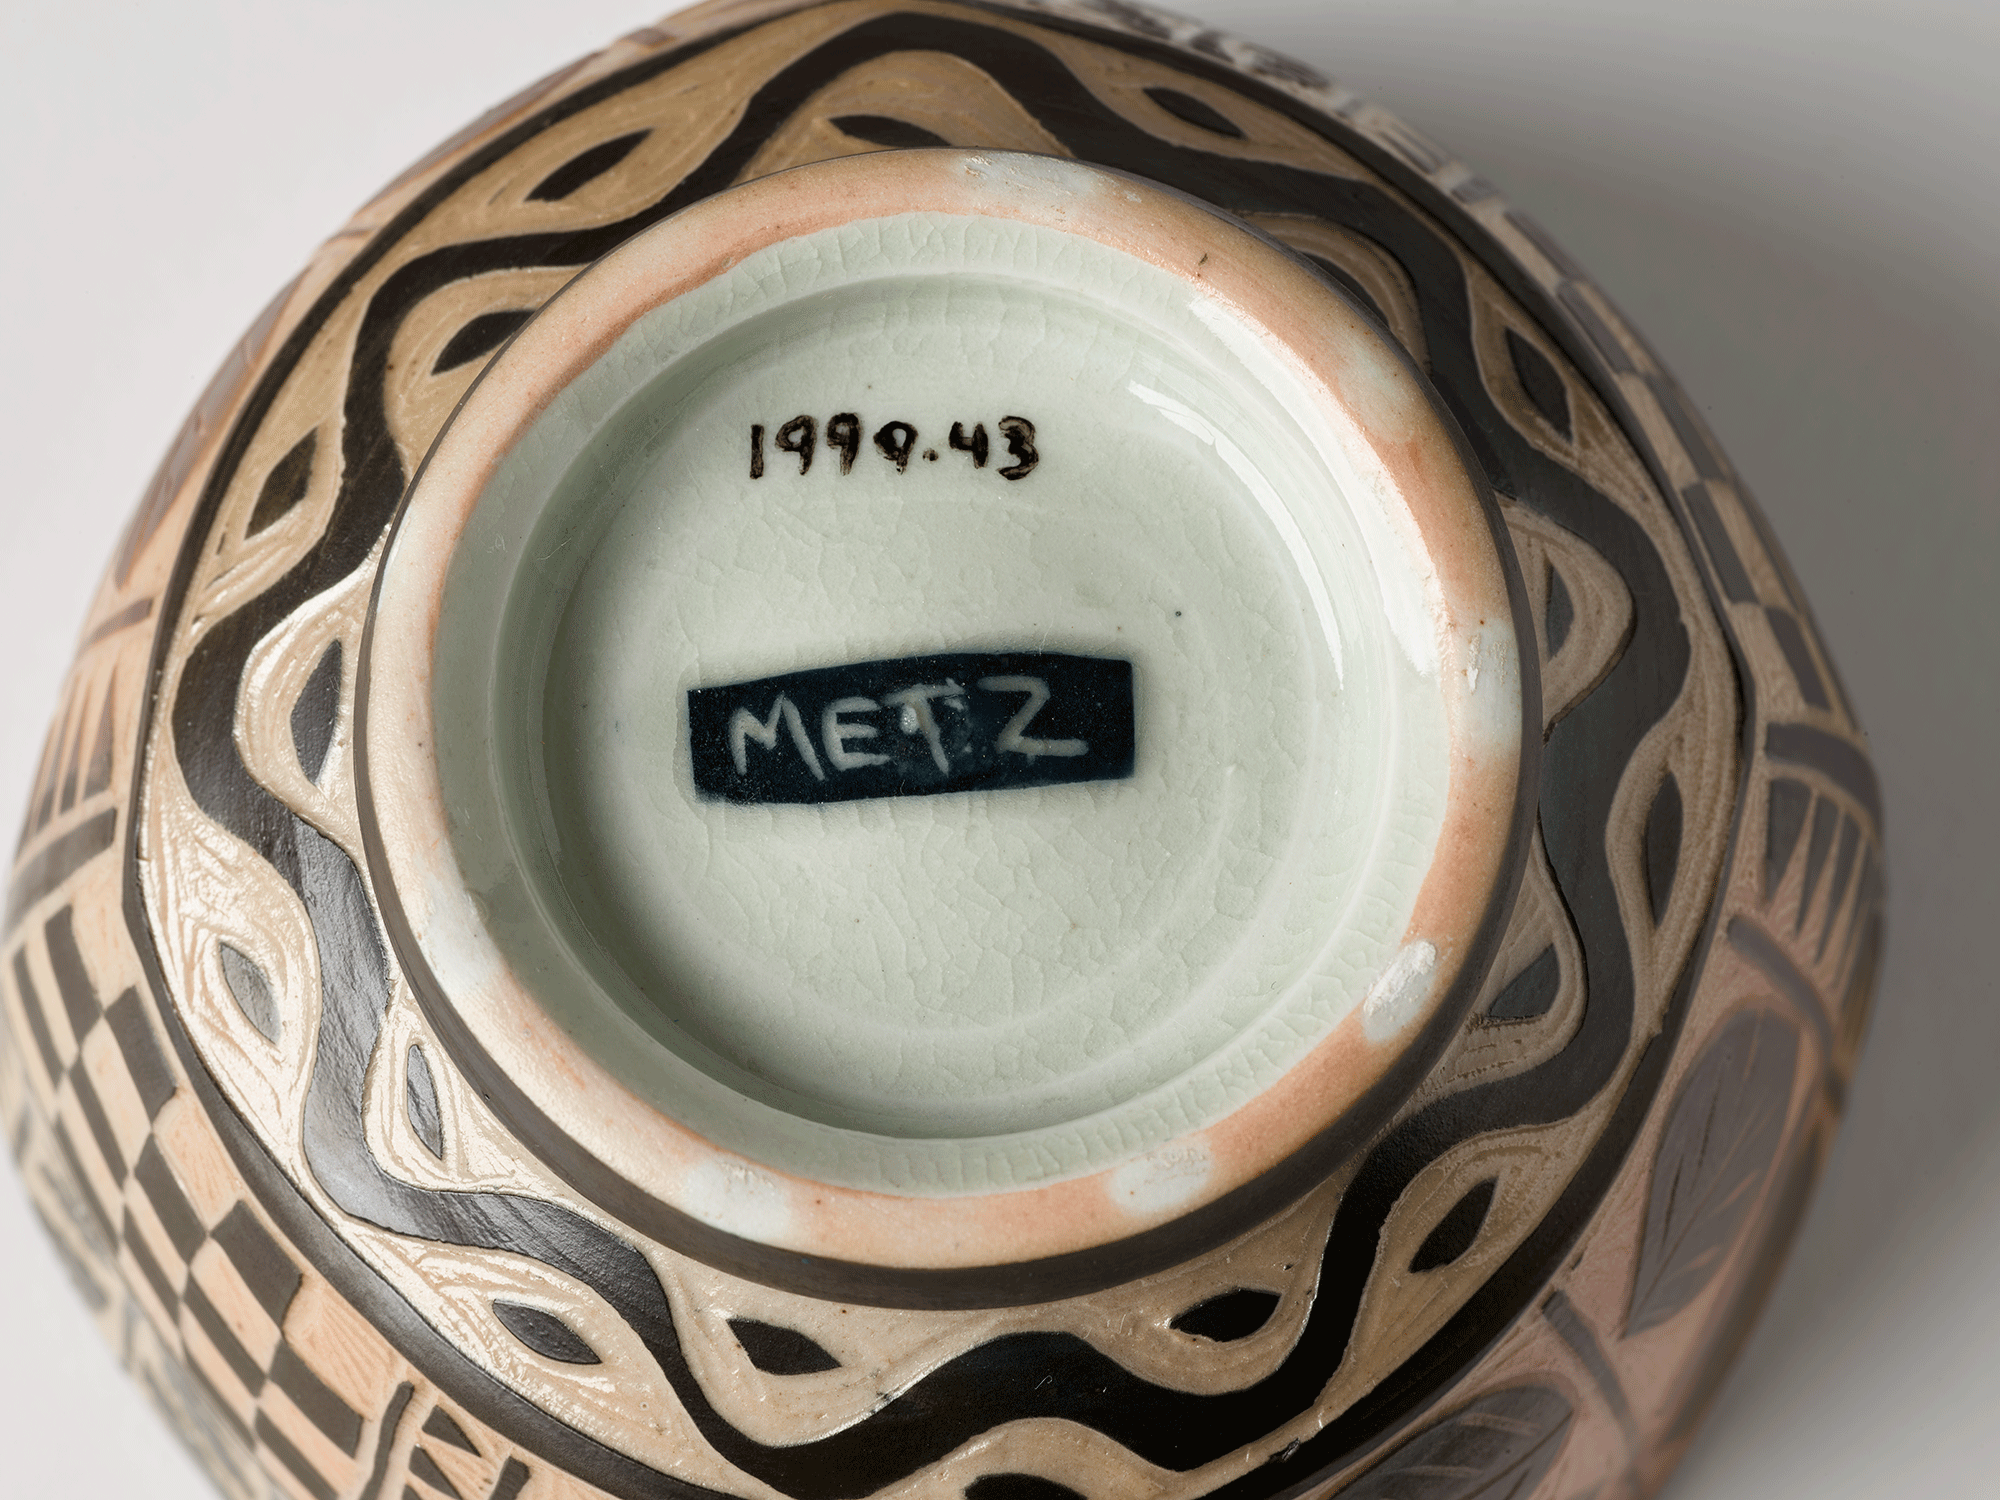 Underside of bowl. Wavy line and leaf-shaped patterning scratched into clay, circling the foot of the bowl. Light green interior of the foot has a black rectangle in the center with the name “Metz” painted inside. Accession number is visible.